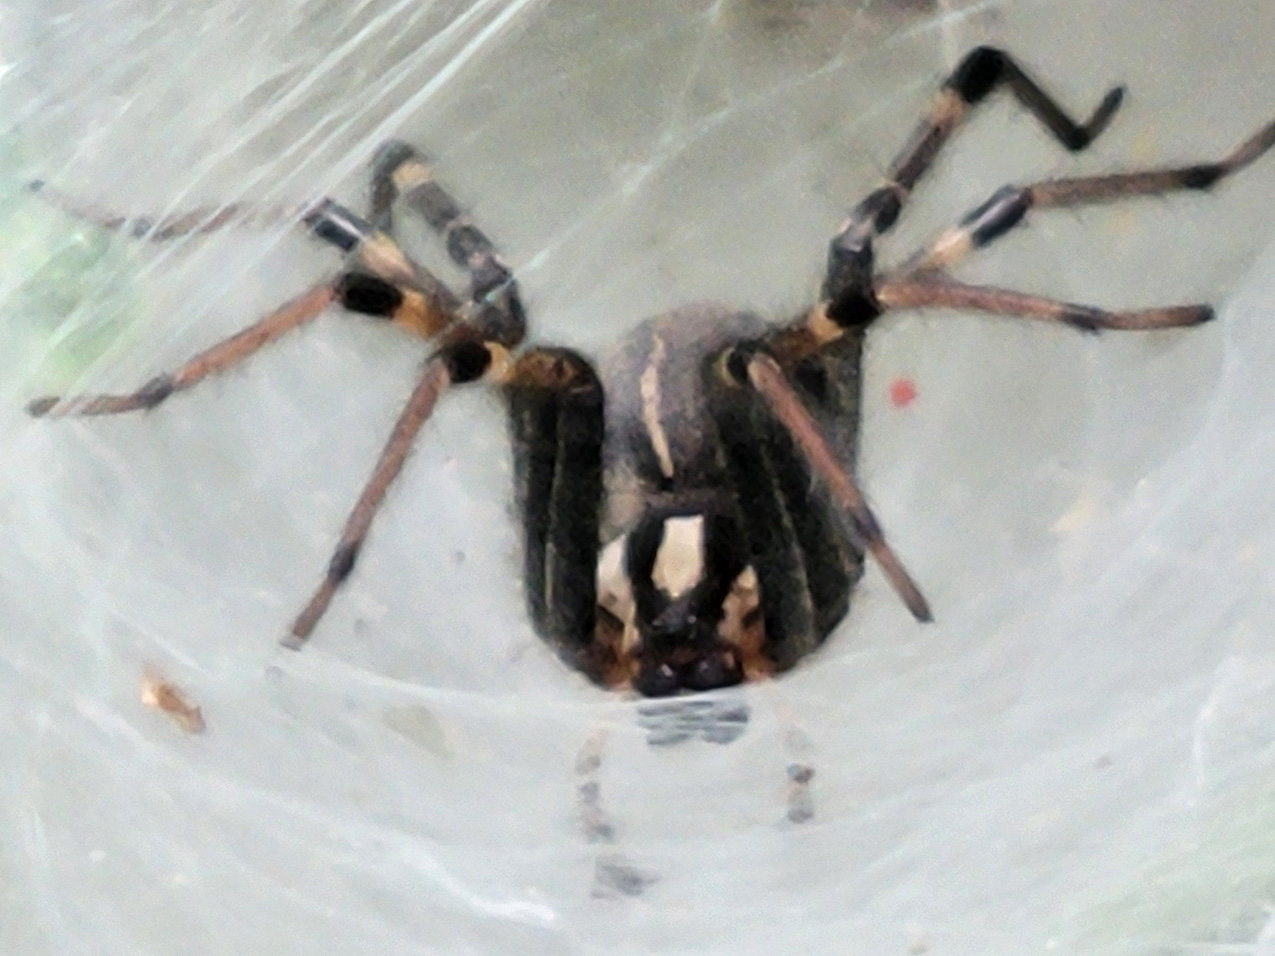 close-up photo of a large spider with hairy legs cradled in the bowl of a web